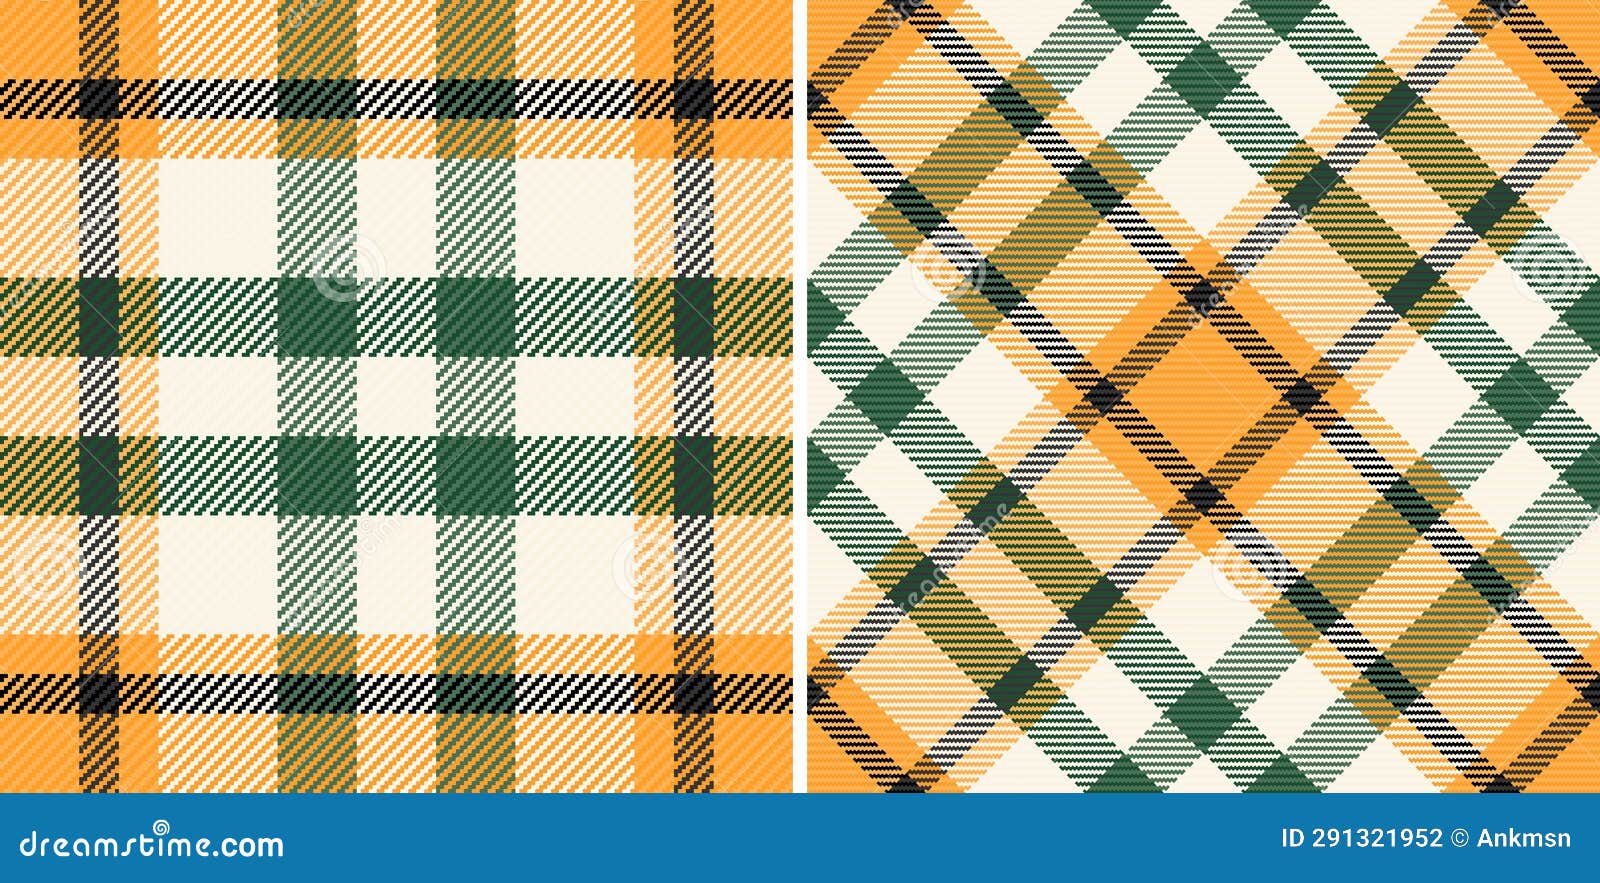 Check Textile Vector of Tartan Plaid Pattern with a Fabric Background ...